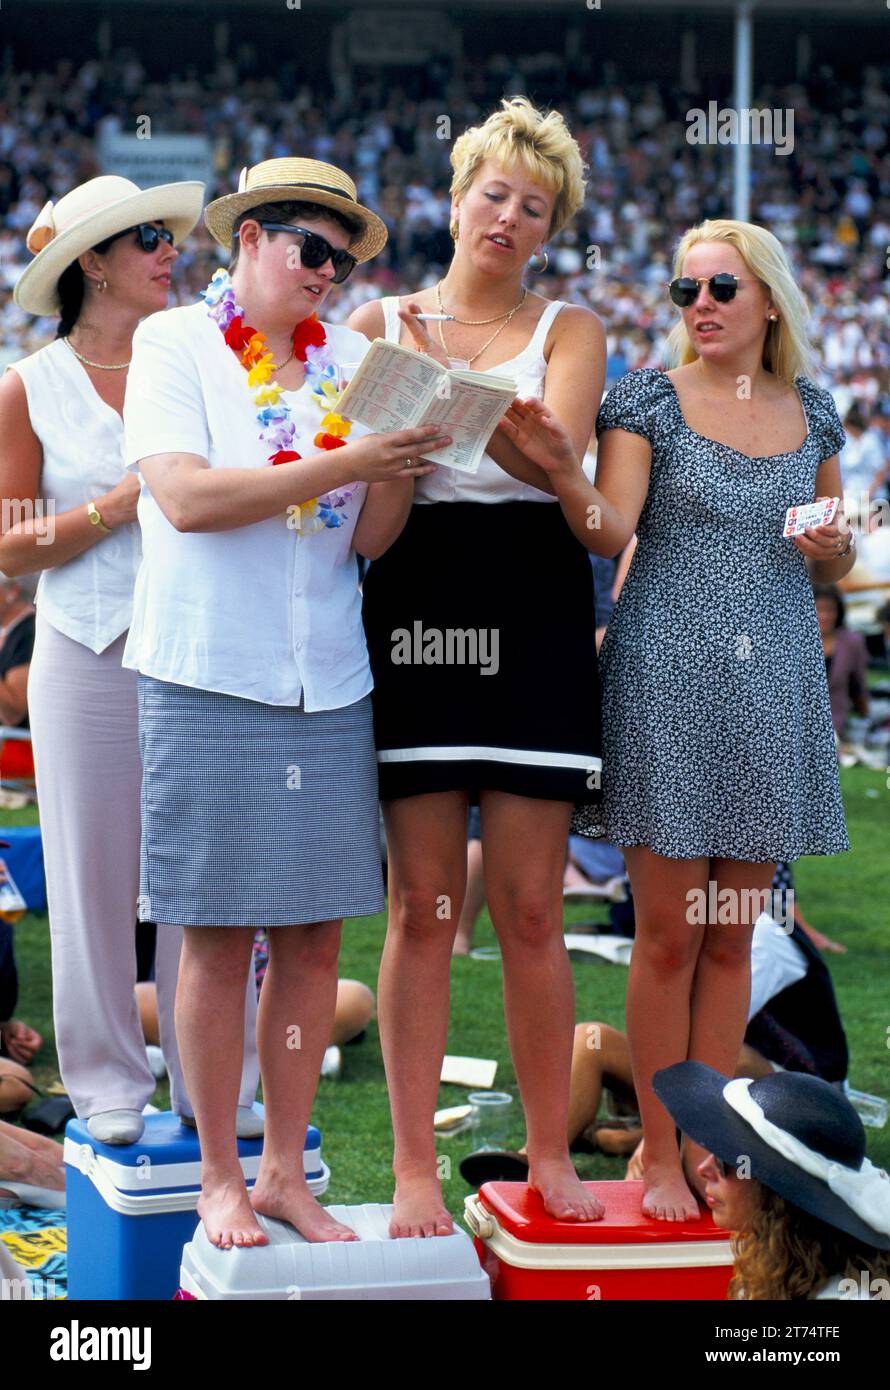 Group of young women standing on picnic boxes to get a better view of the horse racing. They are studying the race card and hoping for the best. Royal Ascot horse racing.  Ascot, Berkshire, England circa June  2005 2000s UK HOMER SYKES Stock Photo